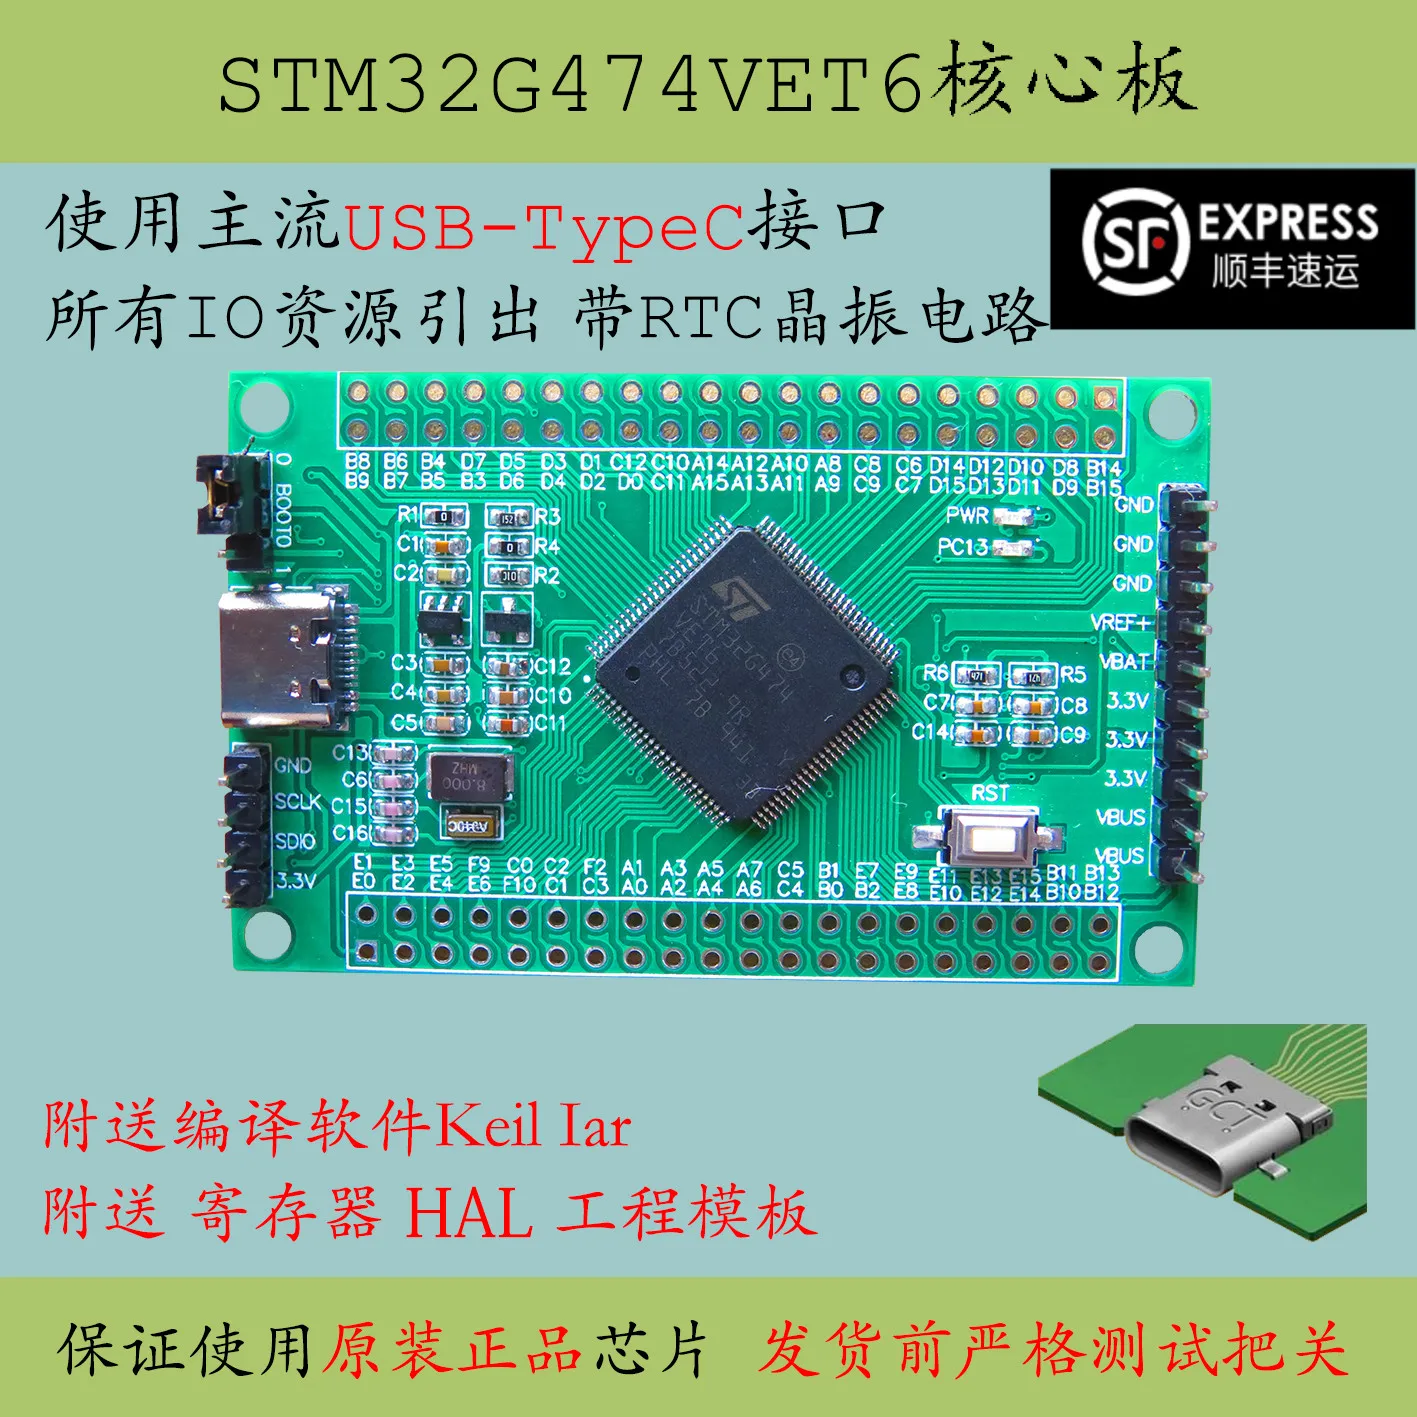 

Stm32g474vet6 single chip microcomputer system G4 core board high capacity new product development 100 evaluation board typec